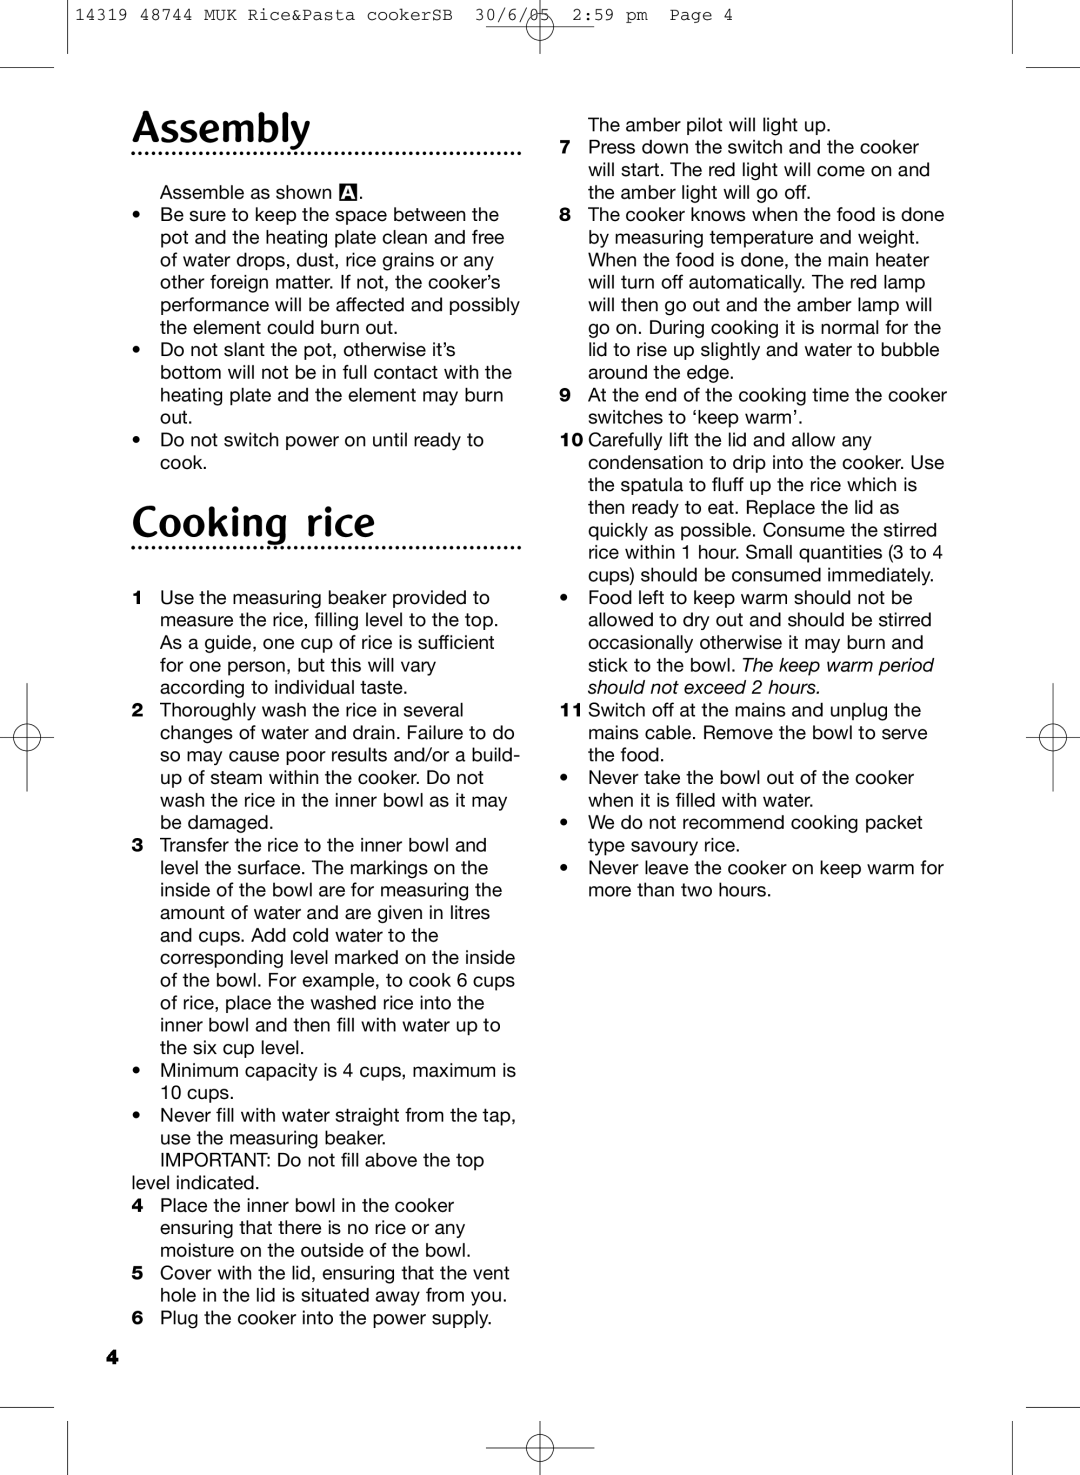 Morphy Richards cooker manual Assembly, Cooking rice 